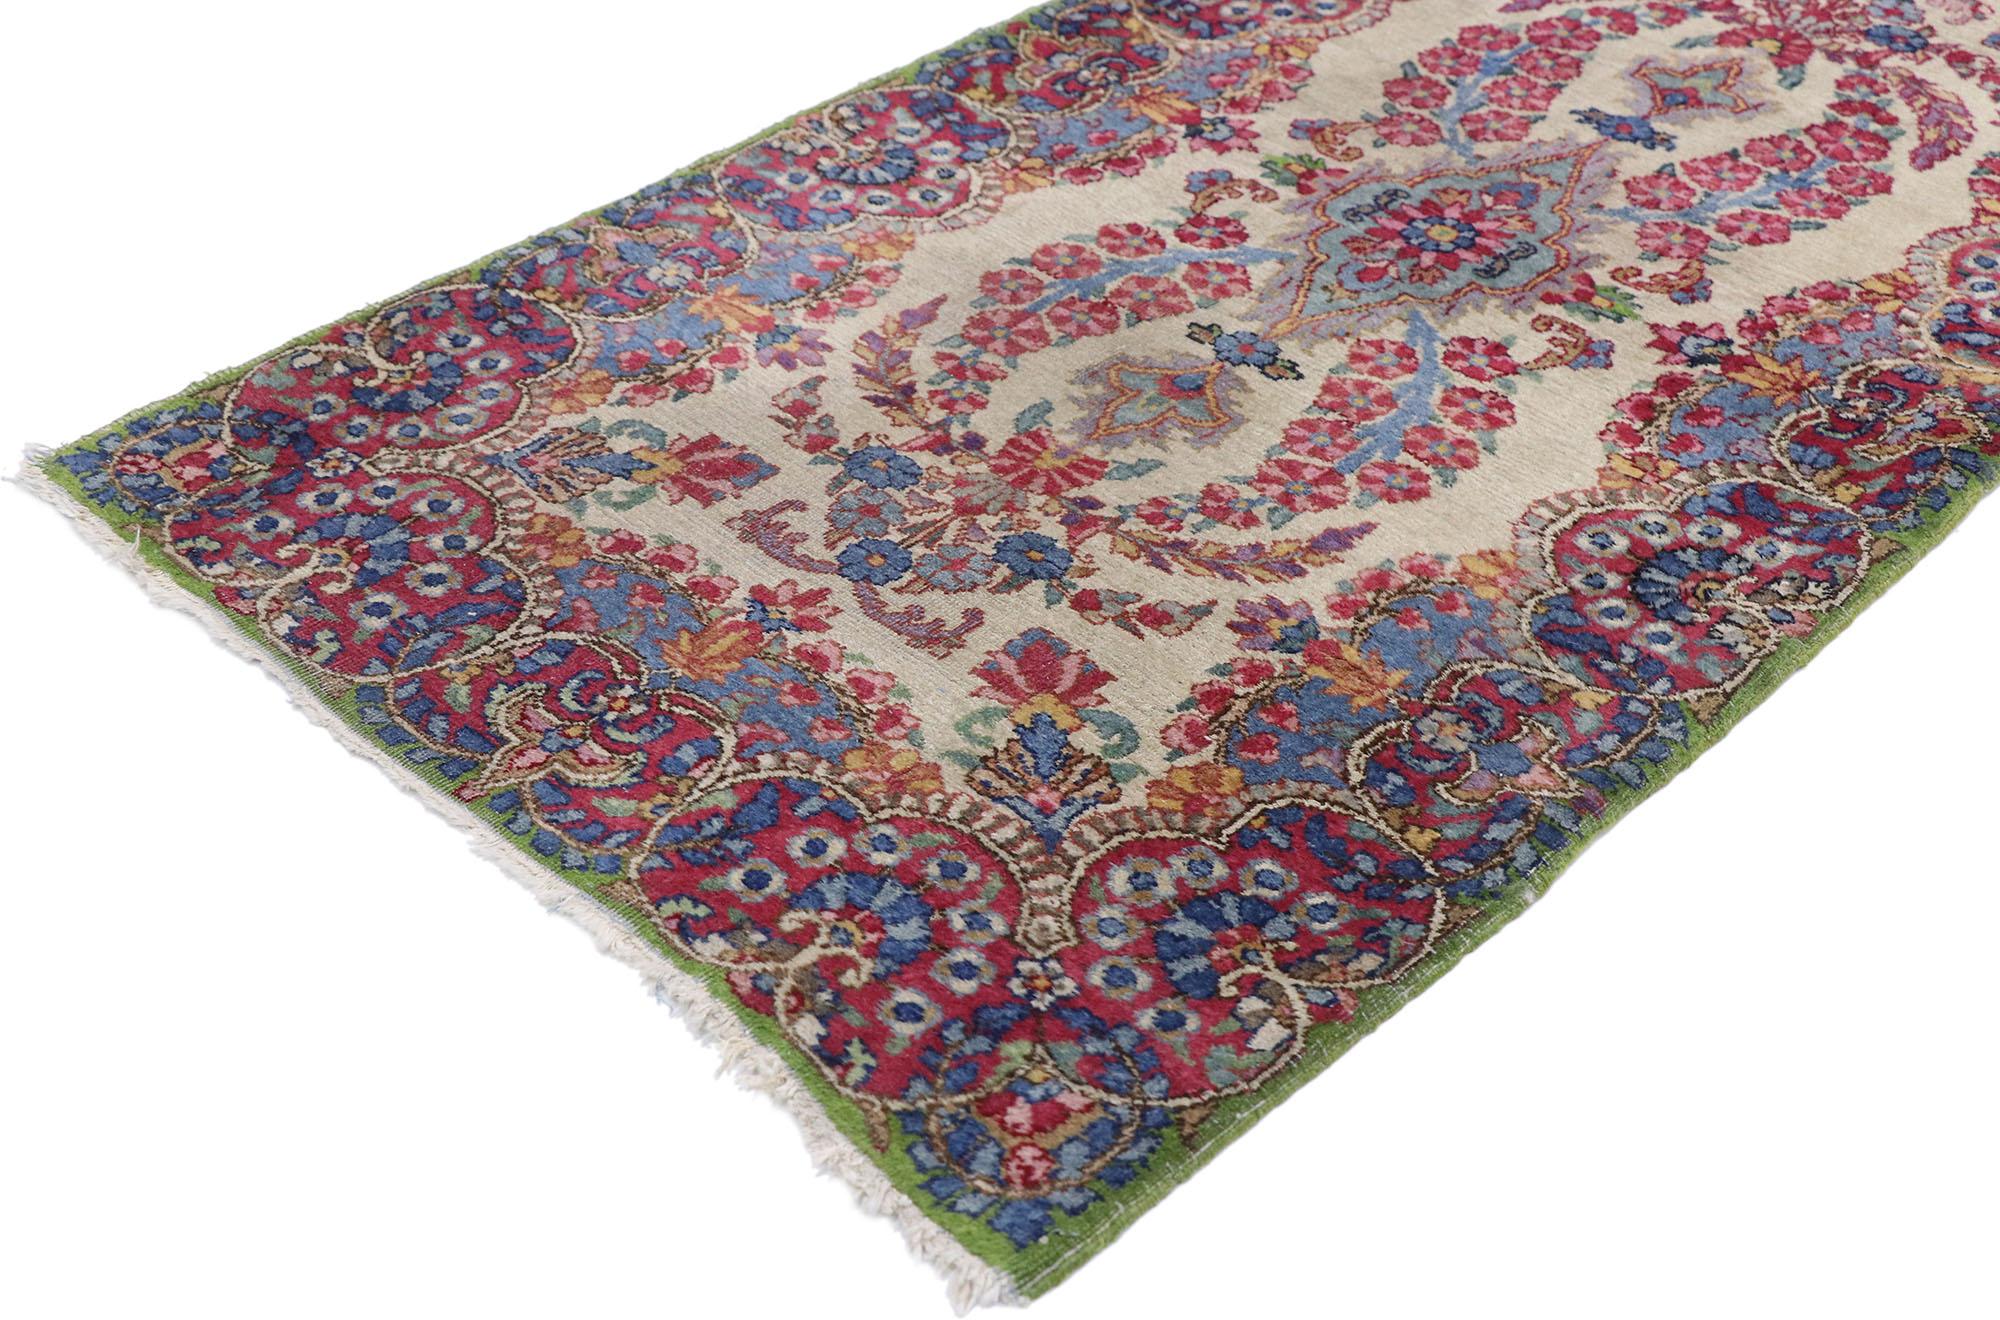 77655 Vintage Persian Kerman rug with French Victorian style. Sophisticated and refined with a French Victorian style, this hand knotted wool vintage Persian Kerman rug charms with ease. The abrashed sandy beige field features colorful floral